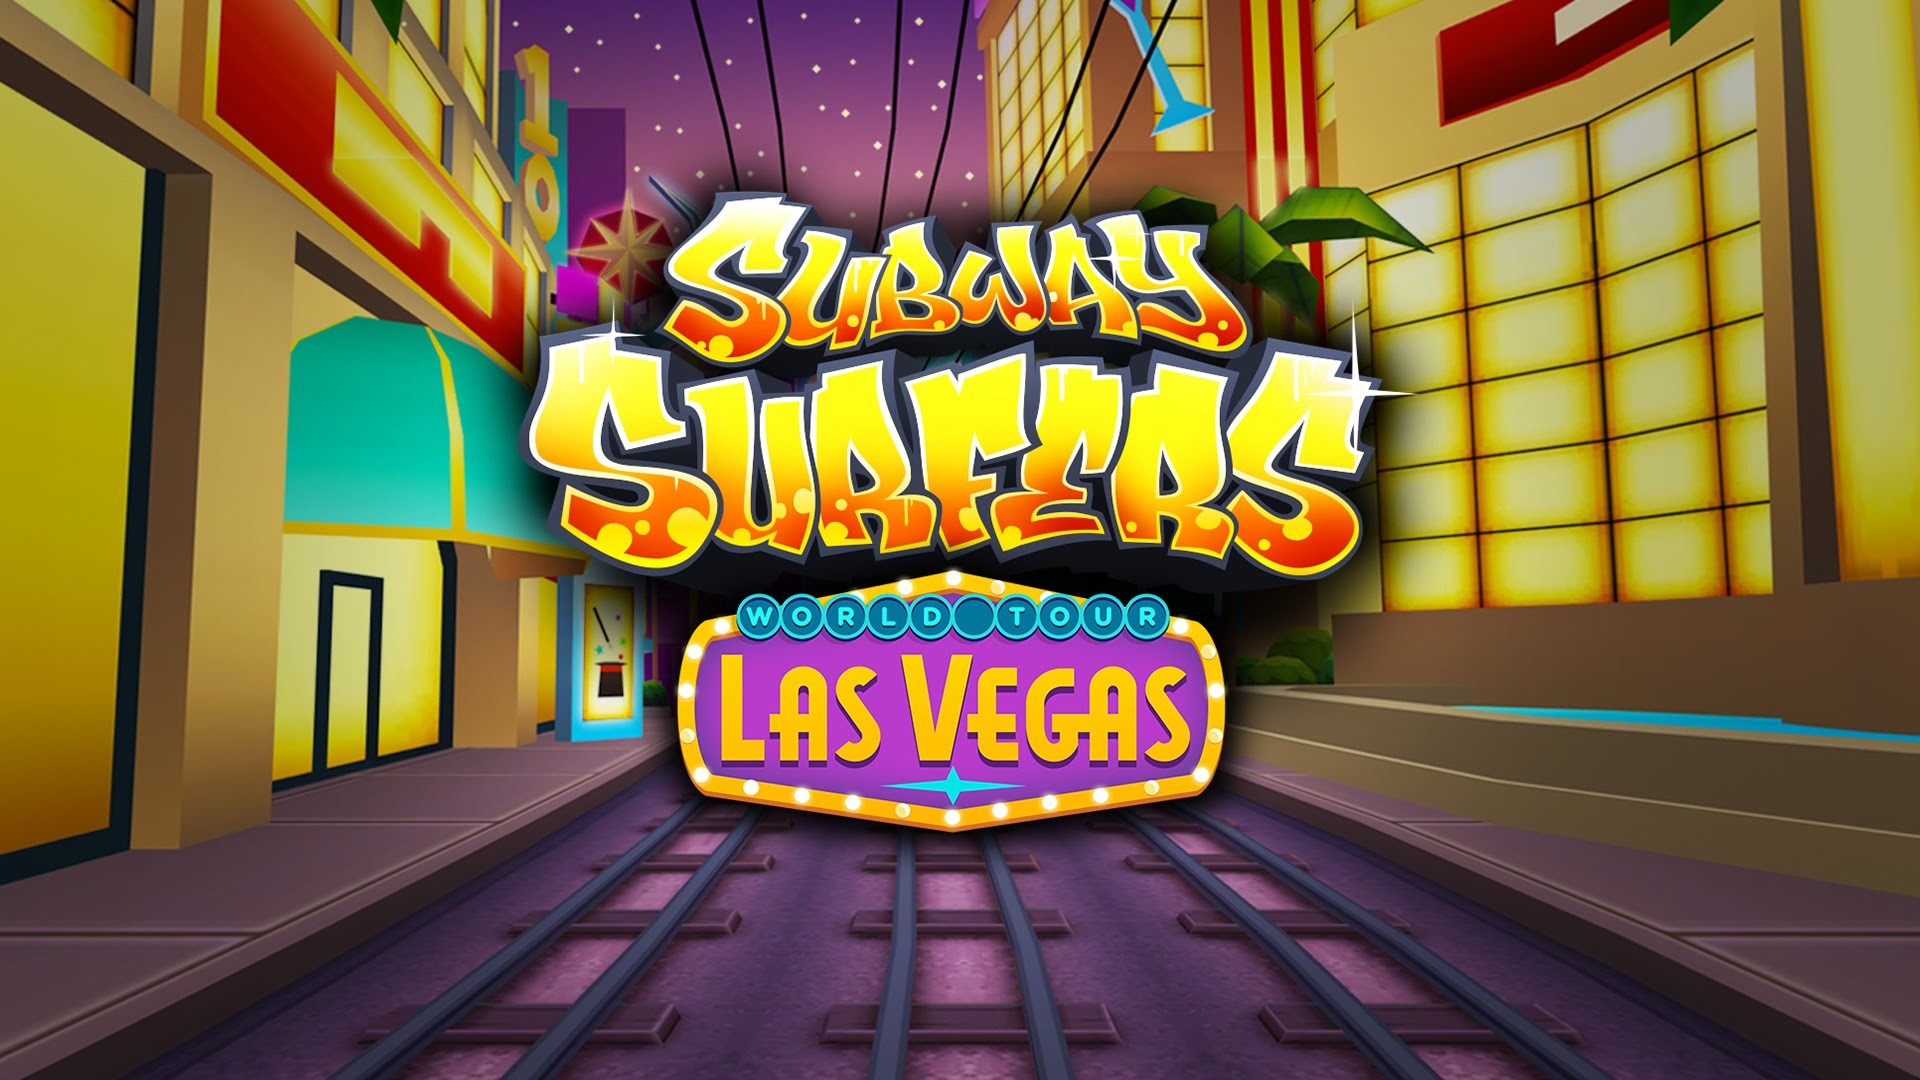 Subway Surfers Wallpapers HD